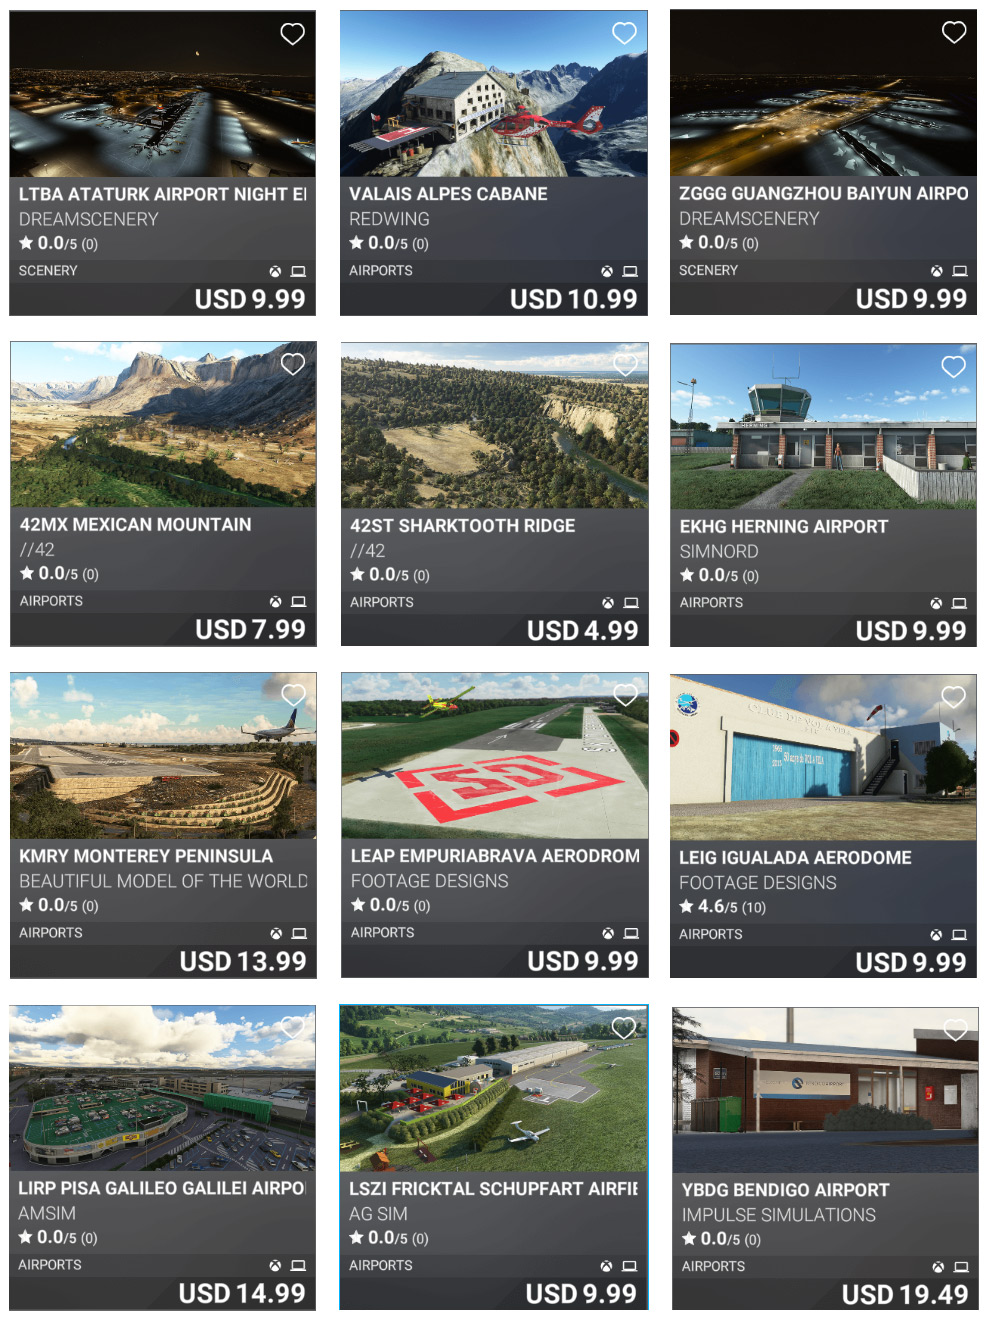 msfs marketplace update out 6 2022 scenery airports